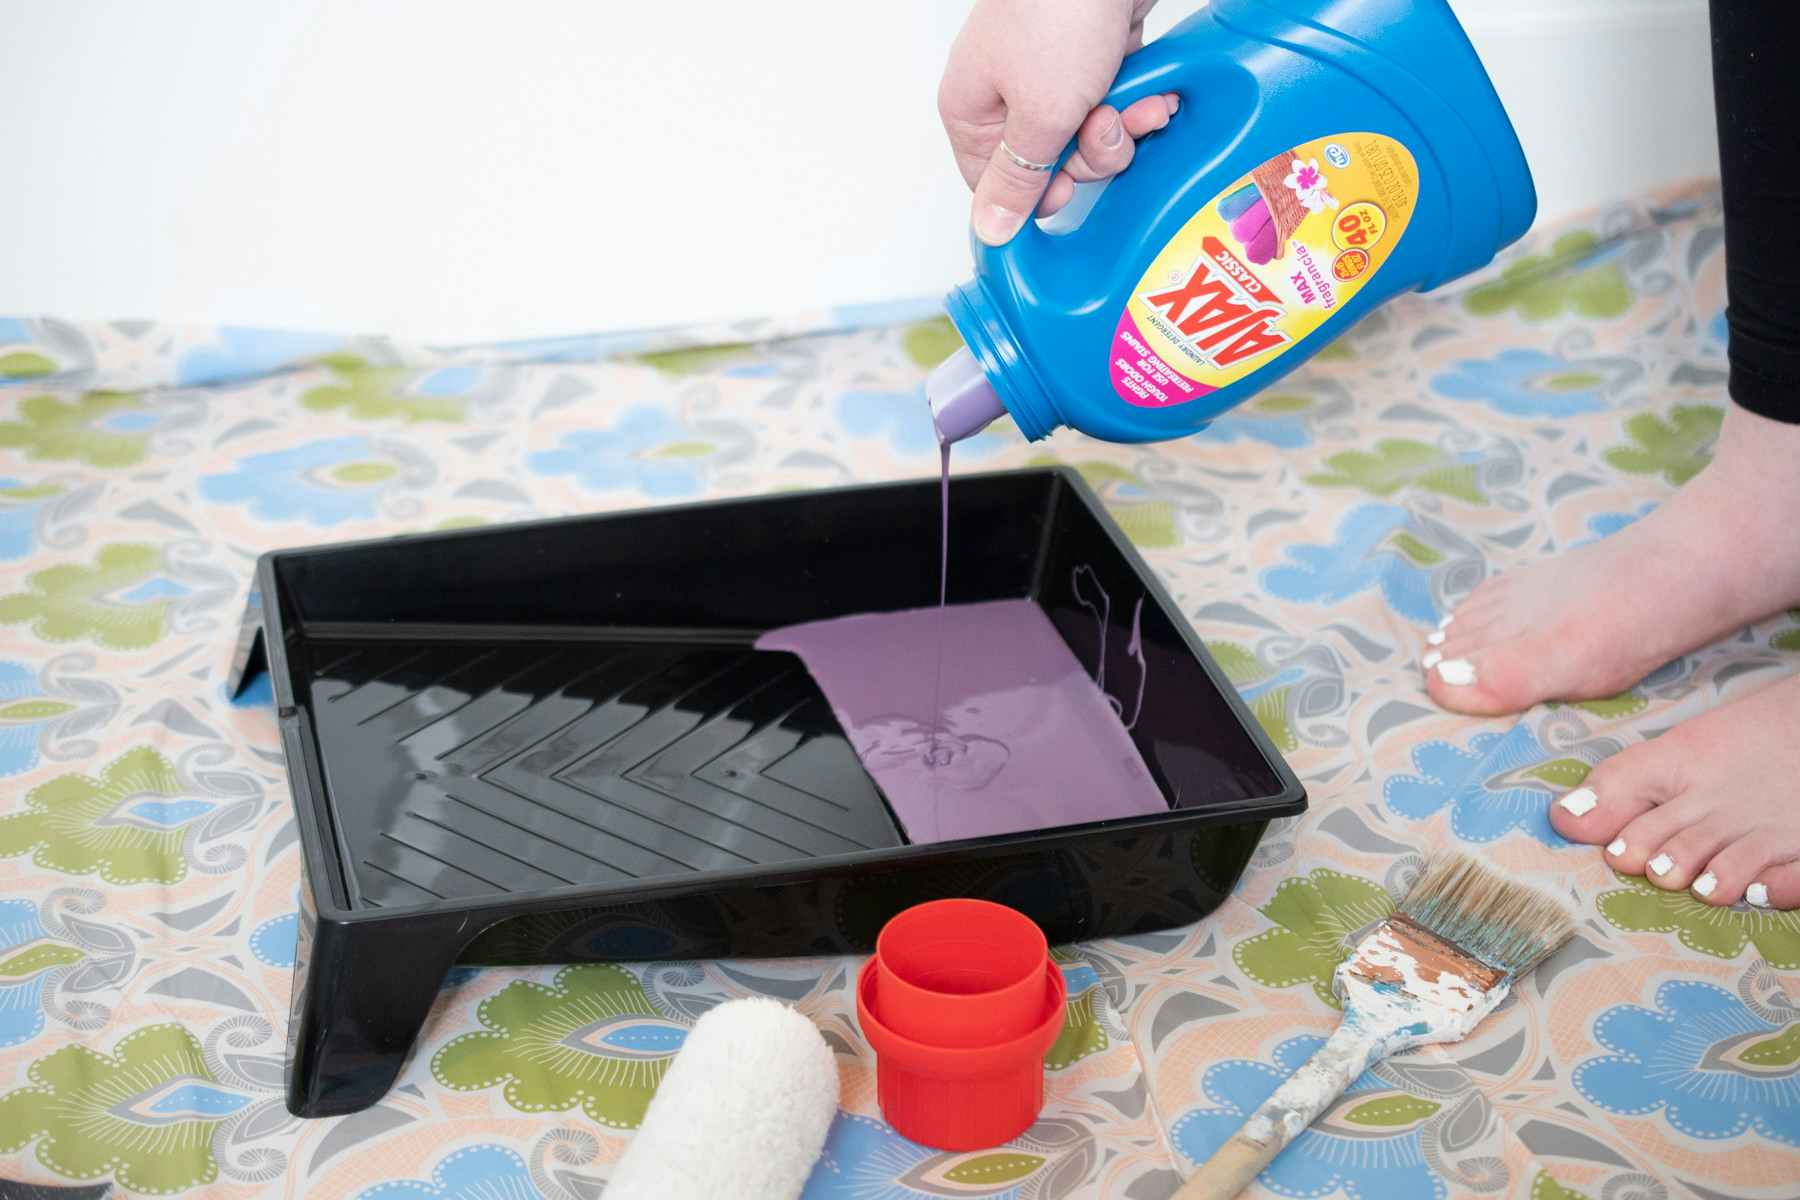 Reuse a laundry detergent bottle to store old paint.